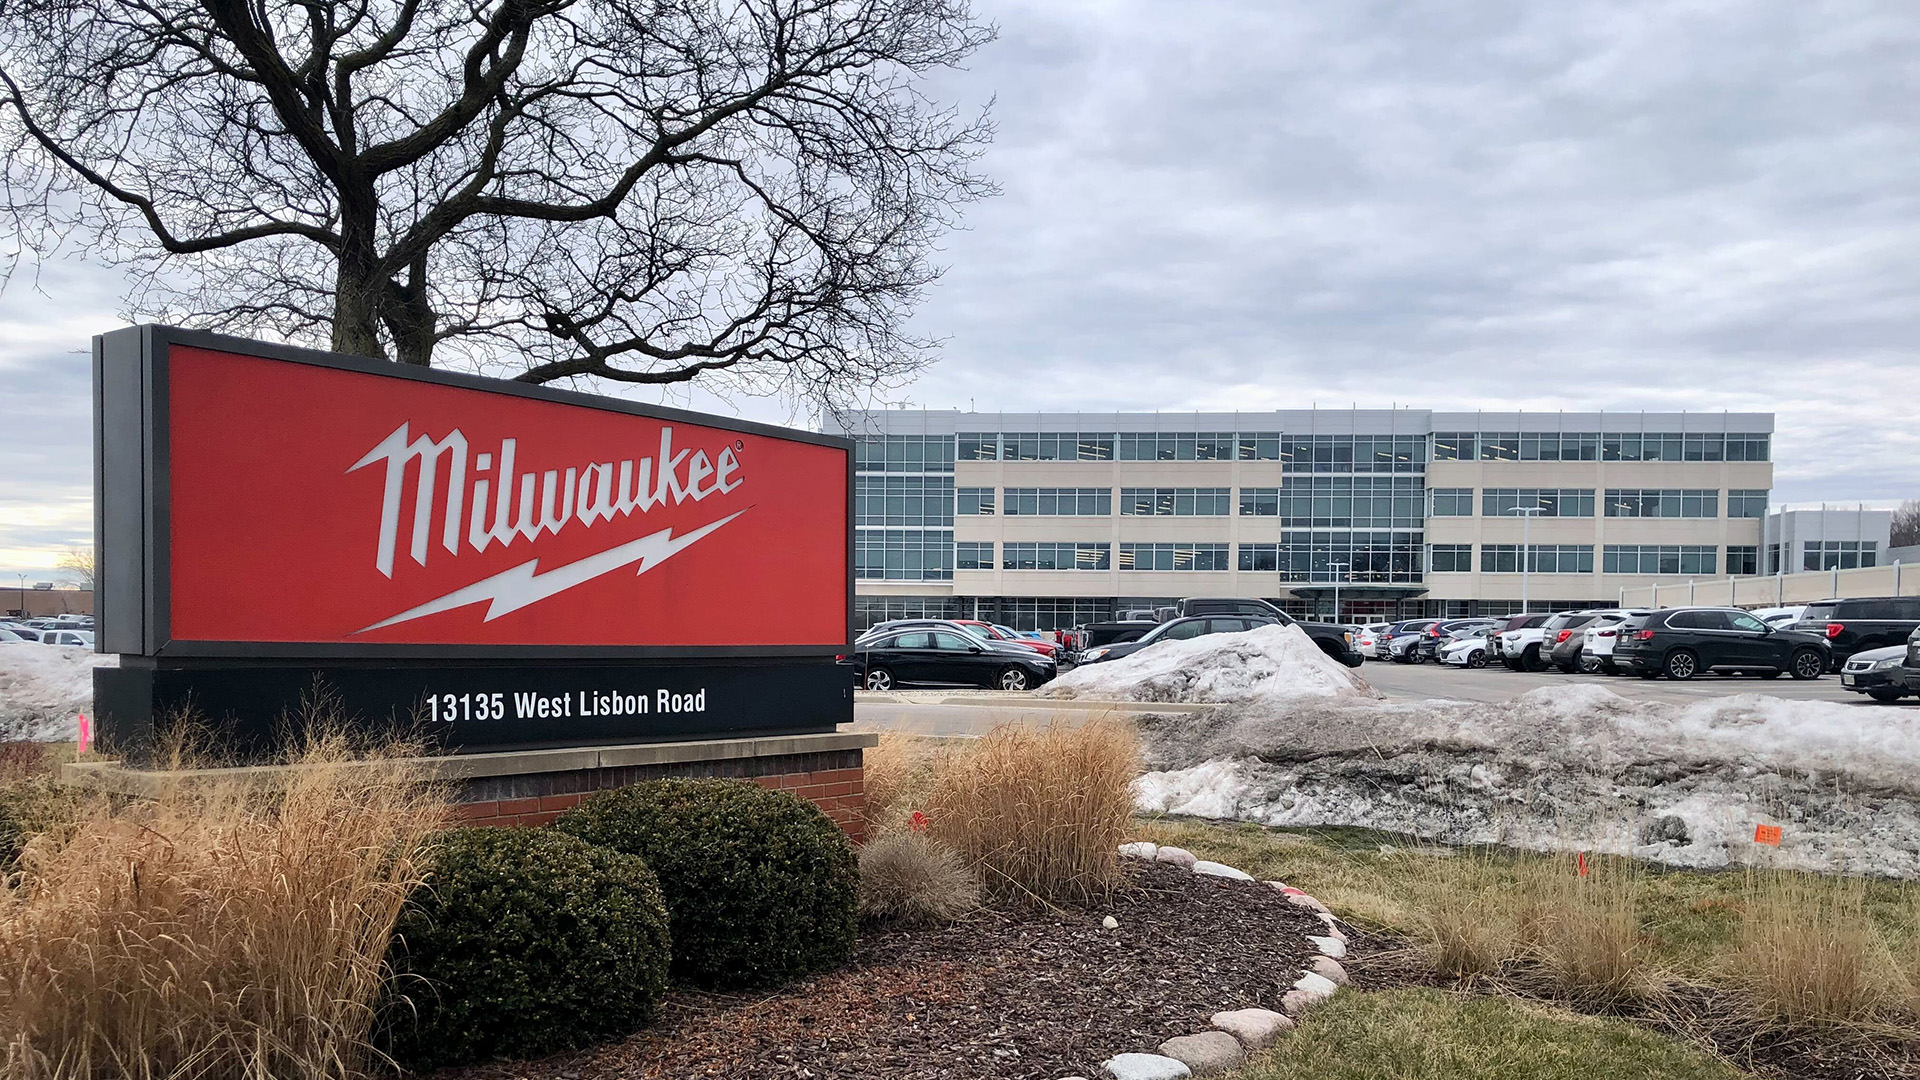 A sign with the Milwaukee Tool wordmark and lightning bolt logo is surrounded by bushes near the entrance to a parking lot, with a tree, parked cars and a multi-story office building in the background.